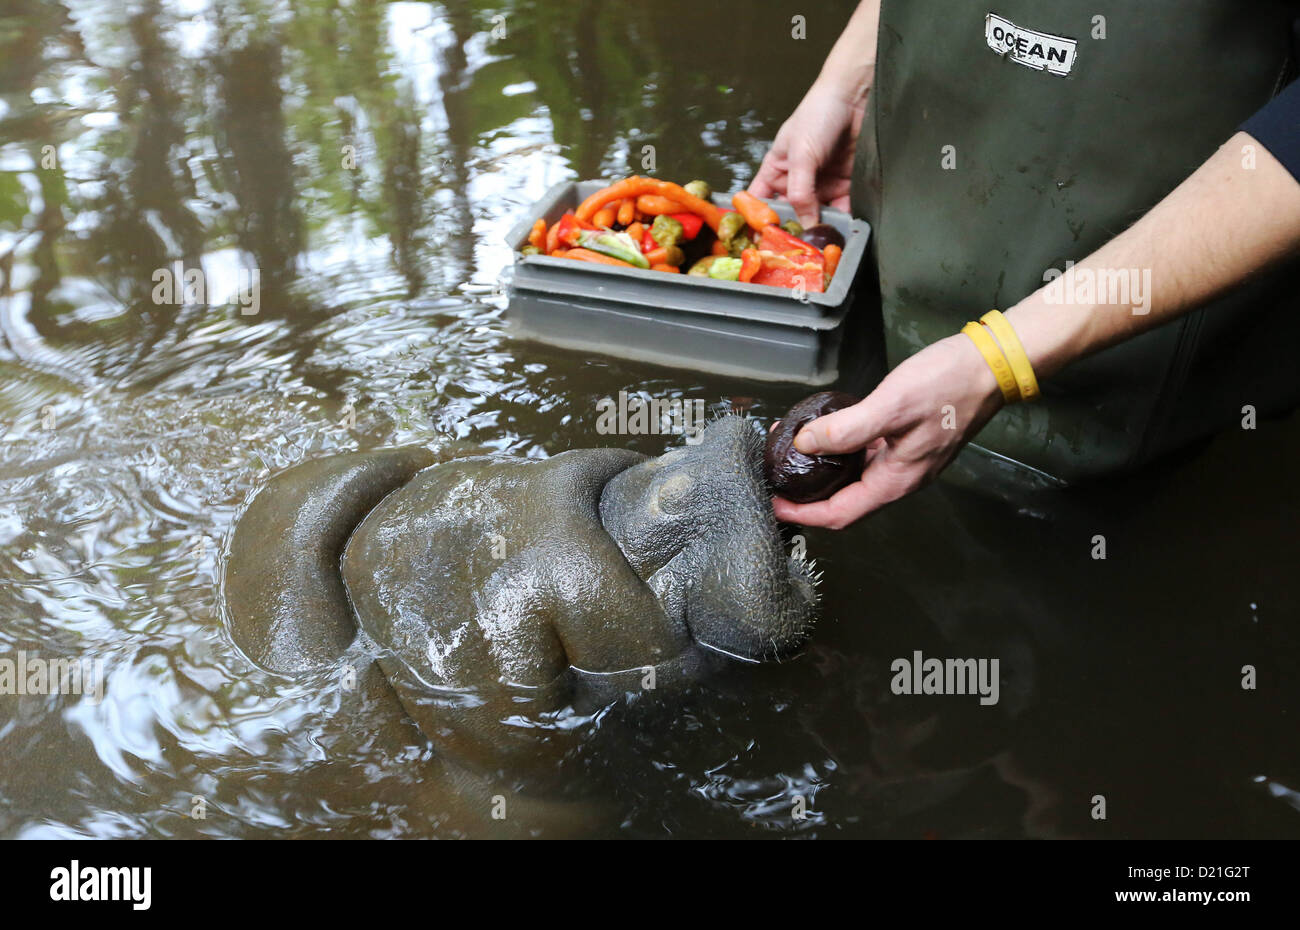 A manatee is fed beets at the Burgers' Zoo in Arnhem, Netherlands, 10 January 2013. The three manatees living at the zoo consume 90 pounds of endives every day and, for a change, carrots and beets. Photo: VidiPhoto - NETHERLANDS OUT Stock Photo